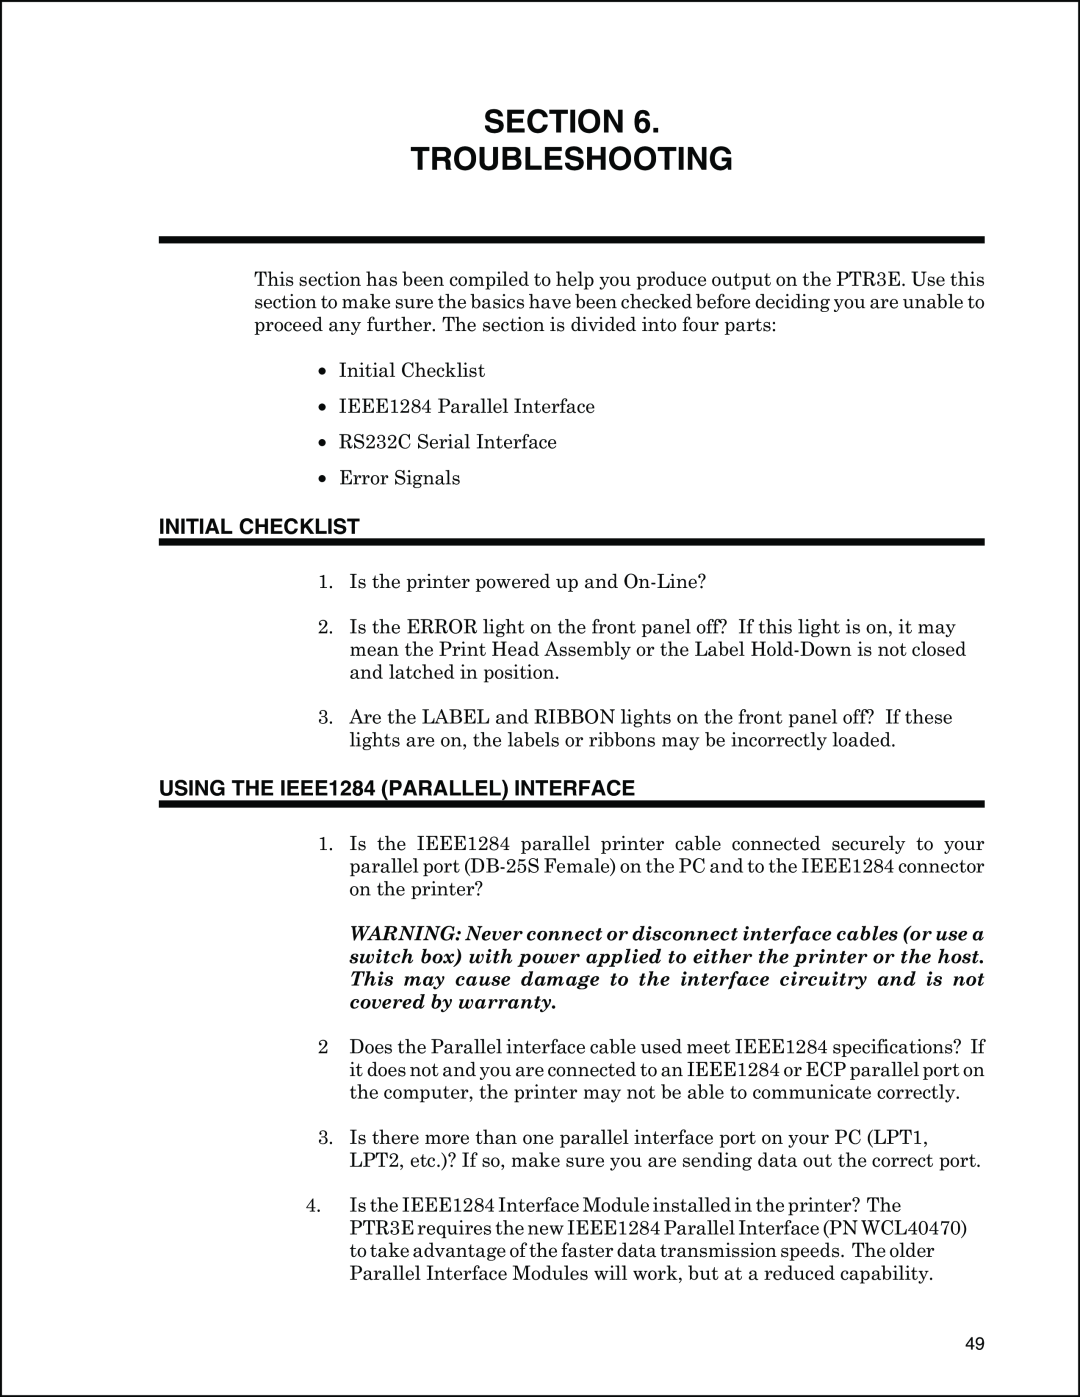 Panduit PTR3E manual Section Troubleshooting, Initial Checklist, USING THE IEEE1284 PARALLEL INTERFACE 